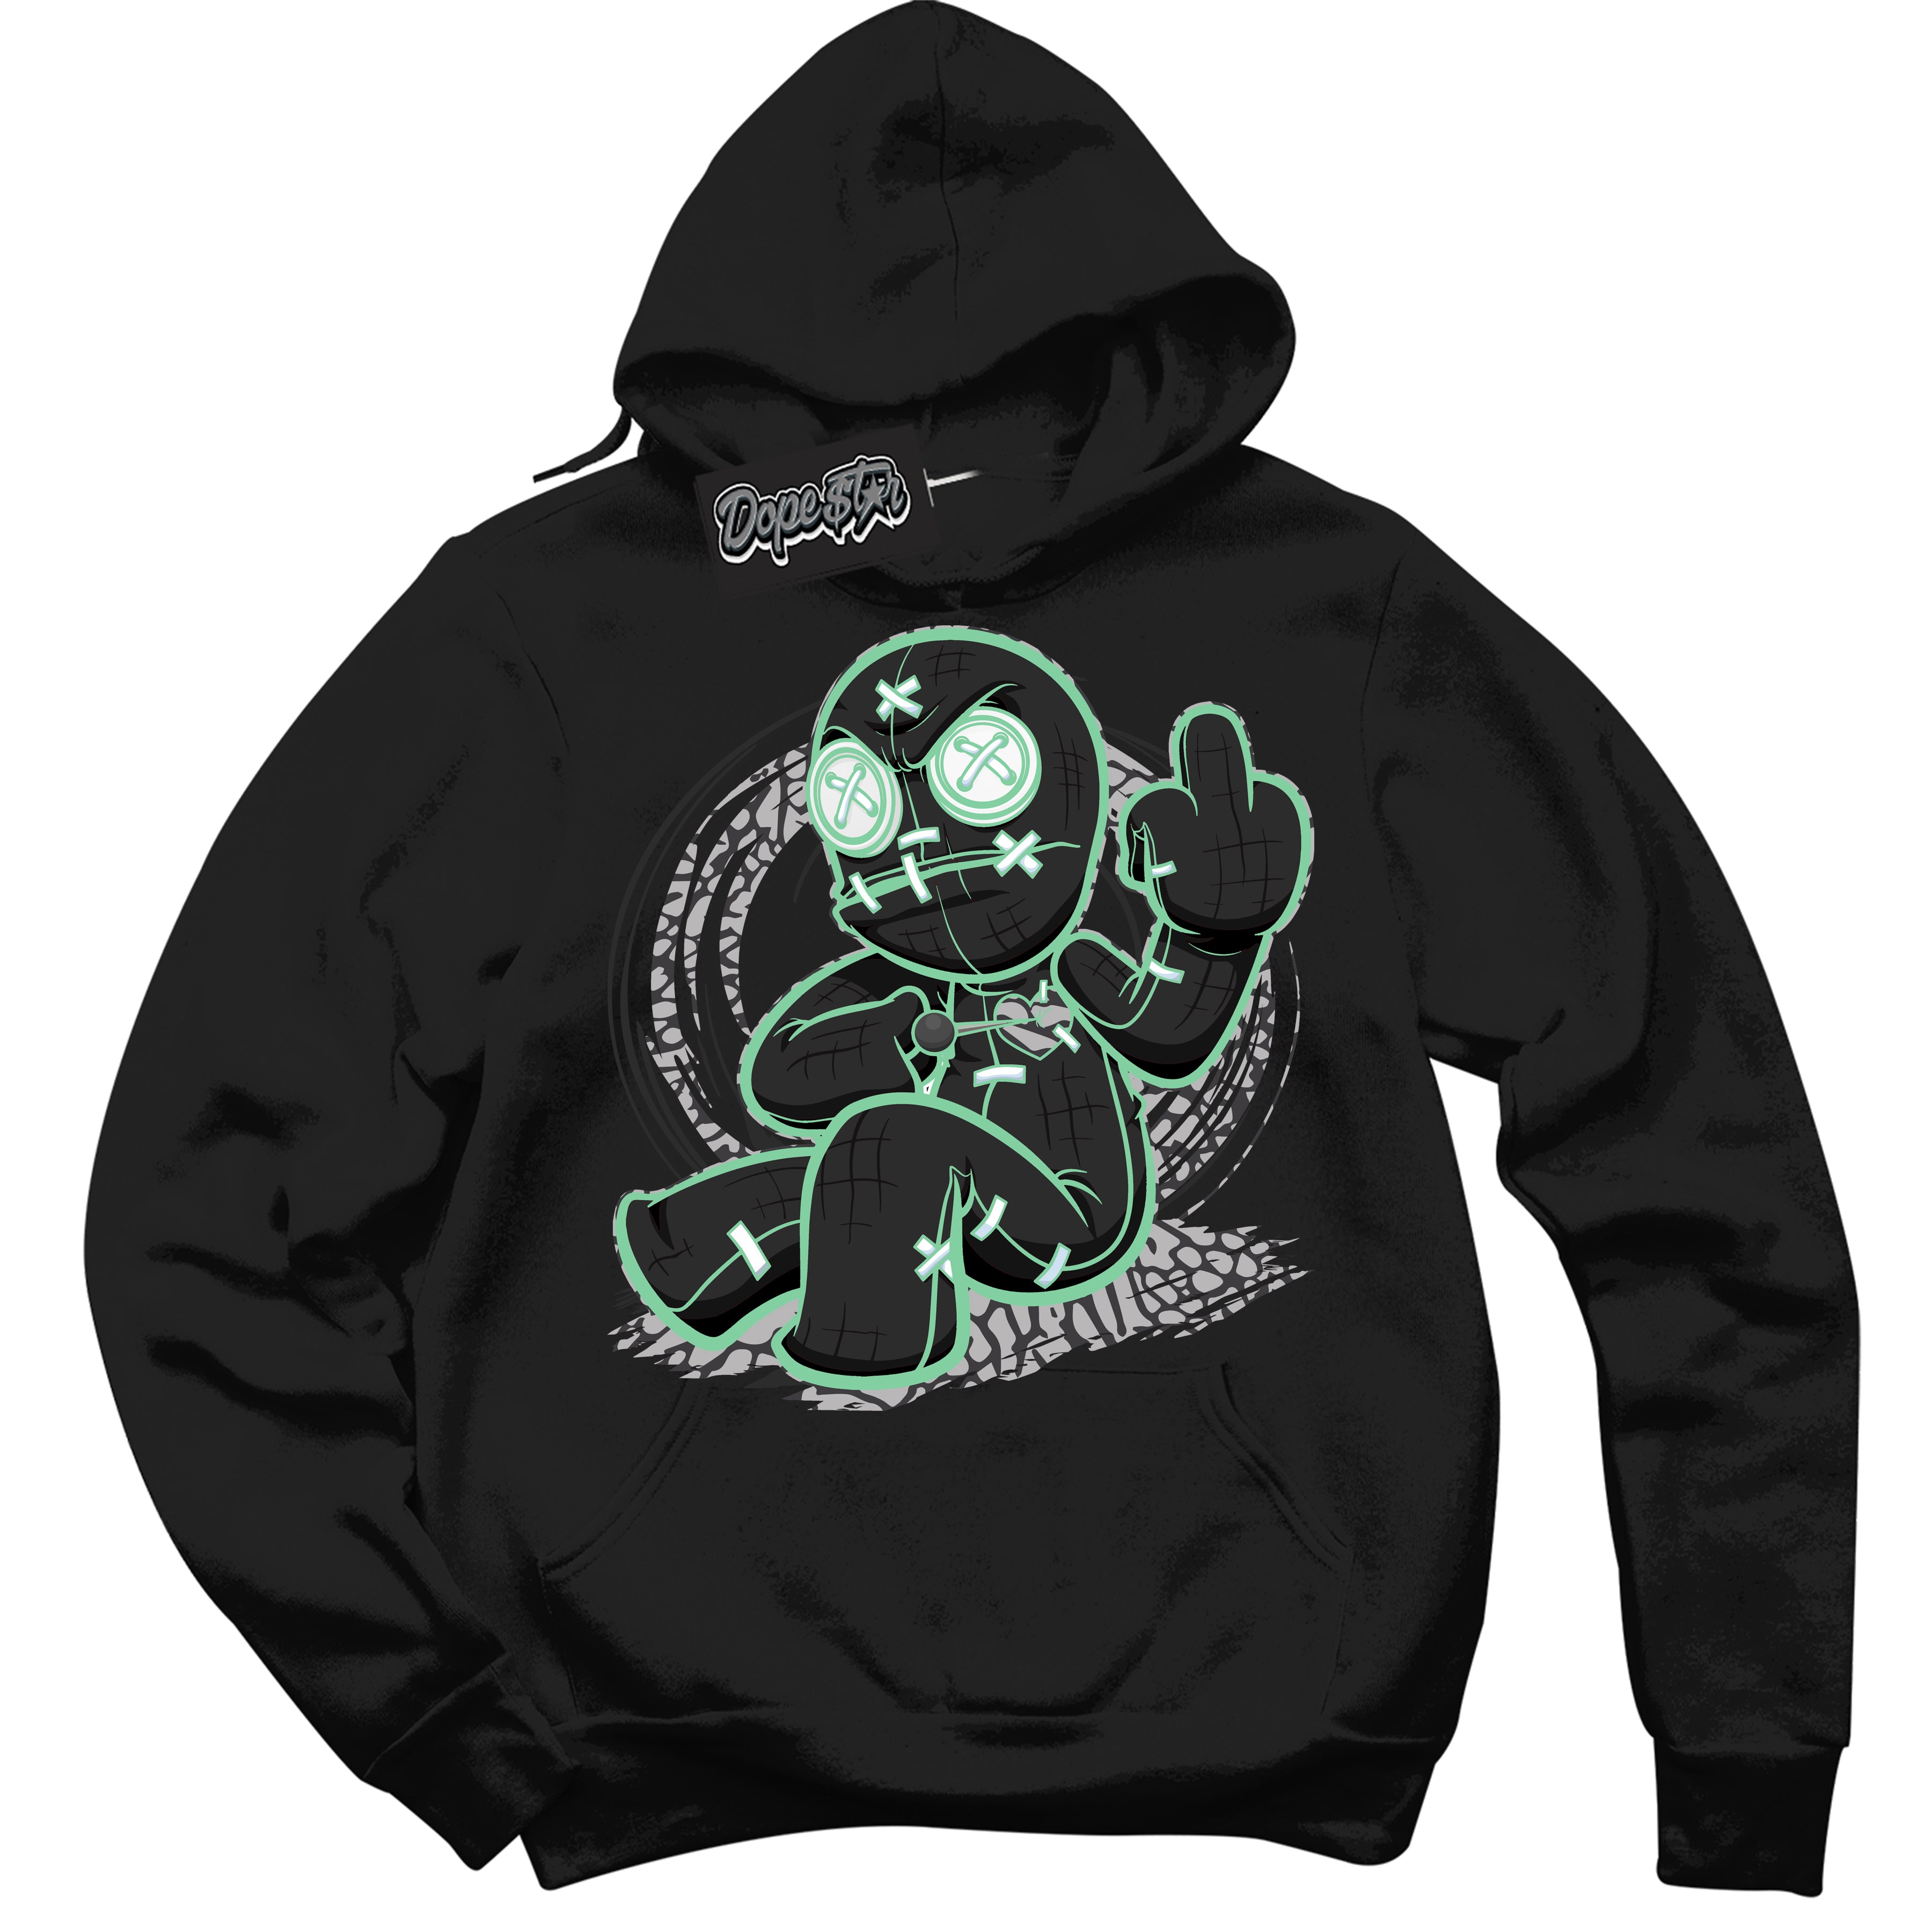 Cool Black Graphic DopeStar Hoodie with “ VooDoo Doll “ print, that perfectly matches Green Glow 3S sneakers